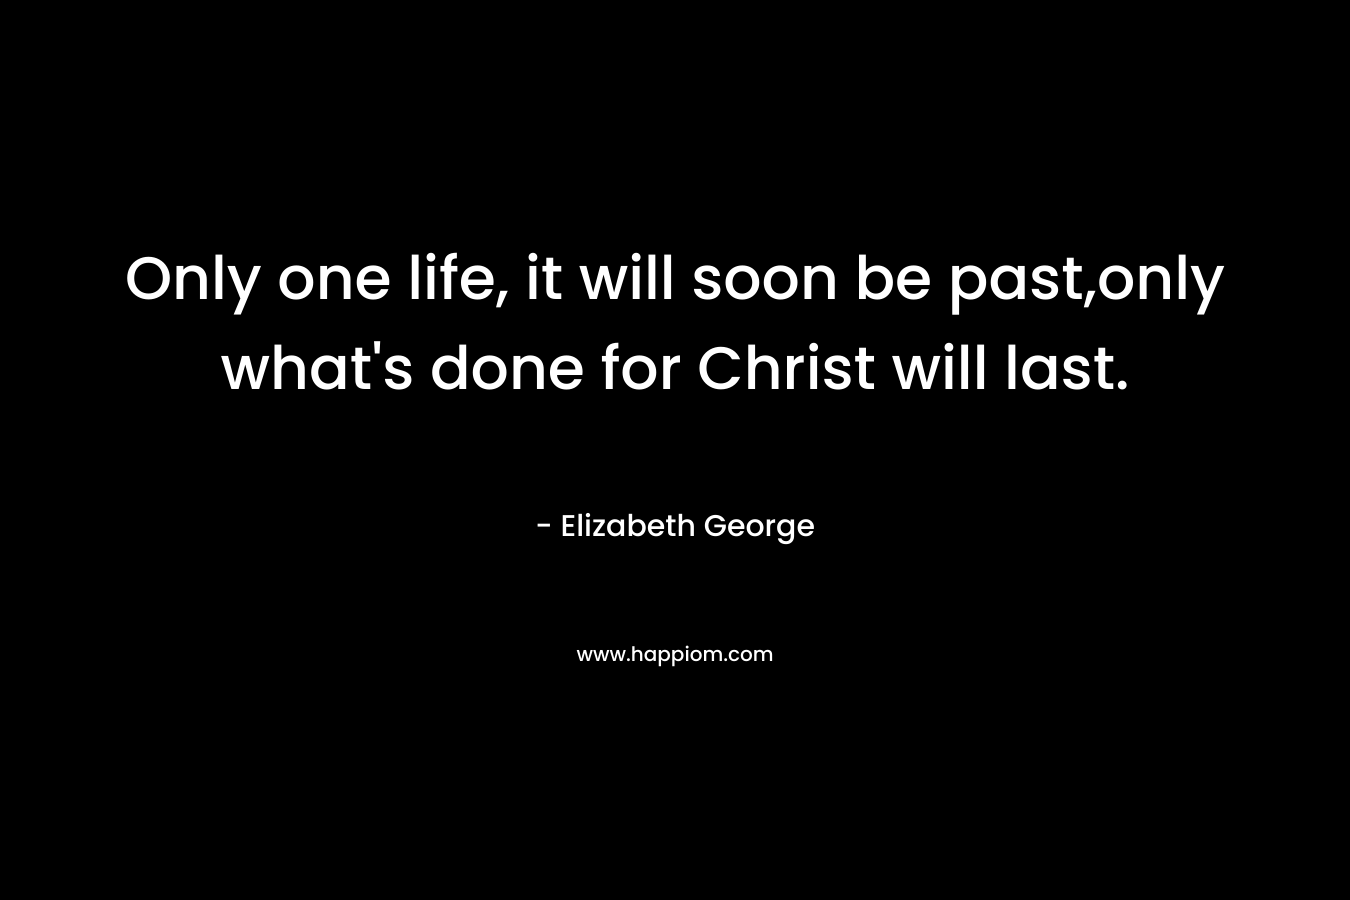 Only one life, it will soon be past,only what's done for Christ will last.